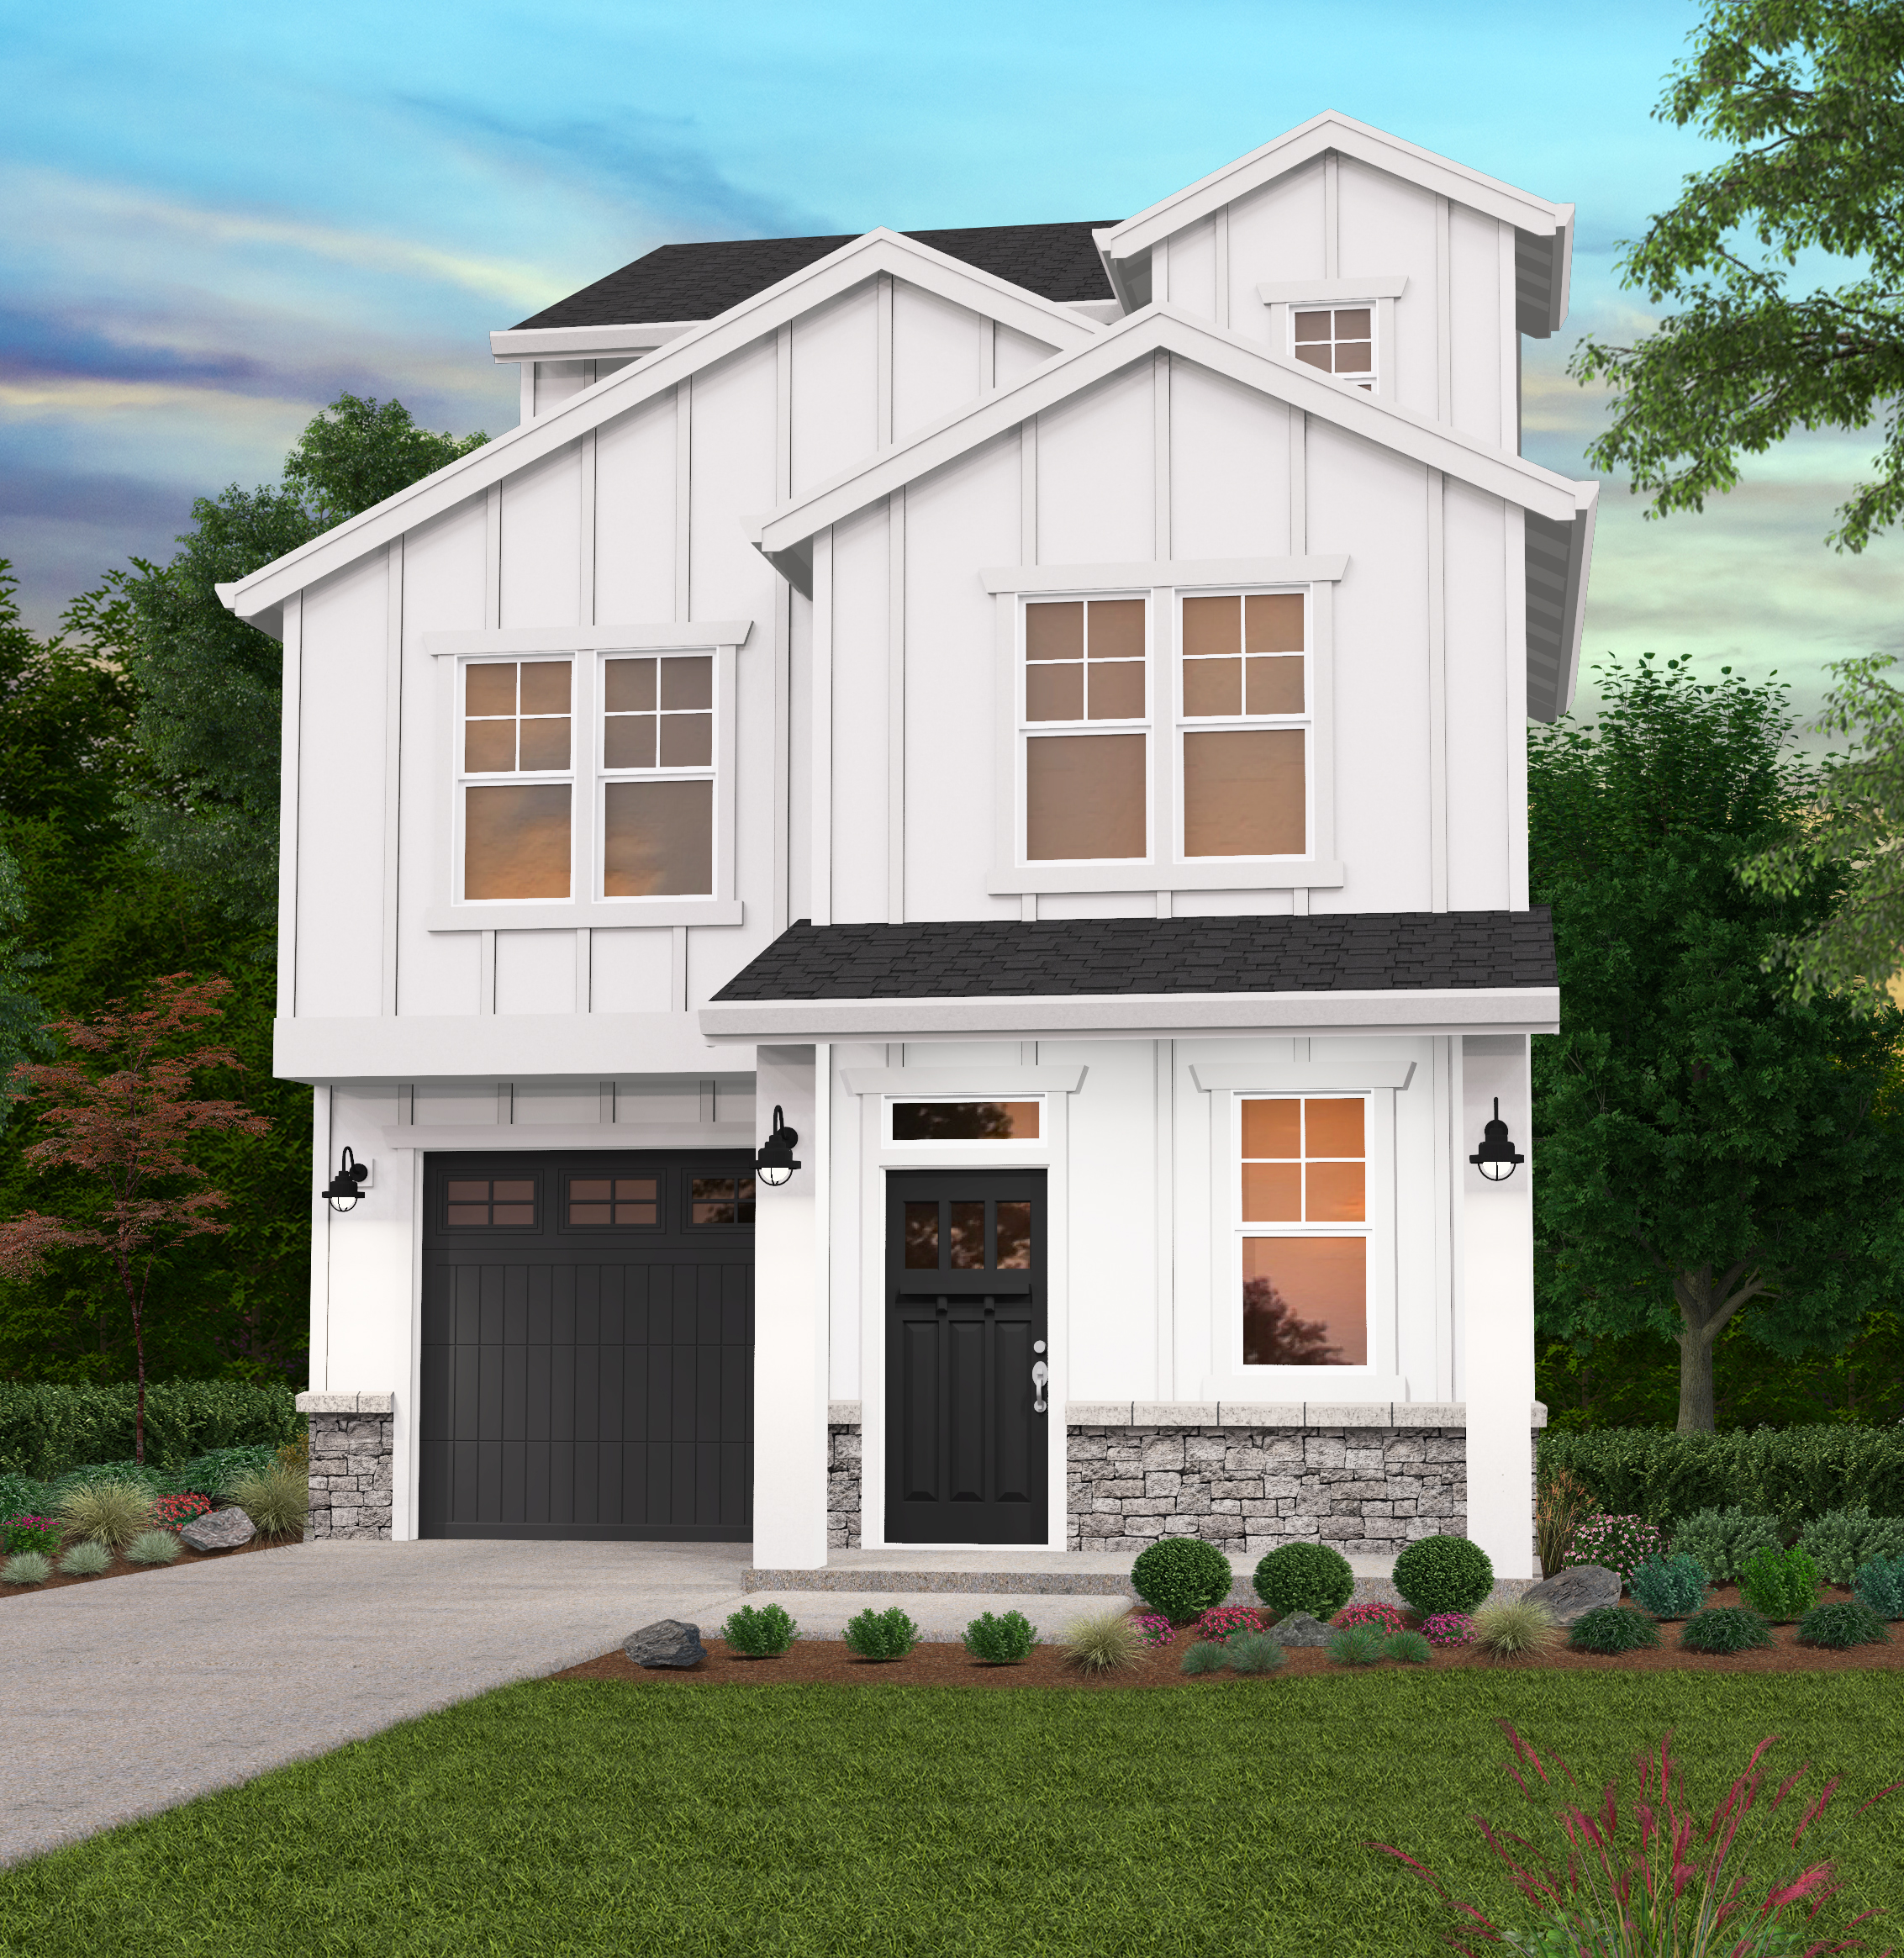 Narrow 3 story craftsman house plan with all kinds of space